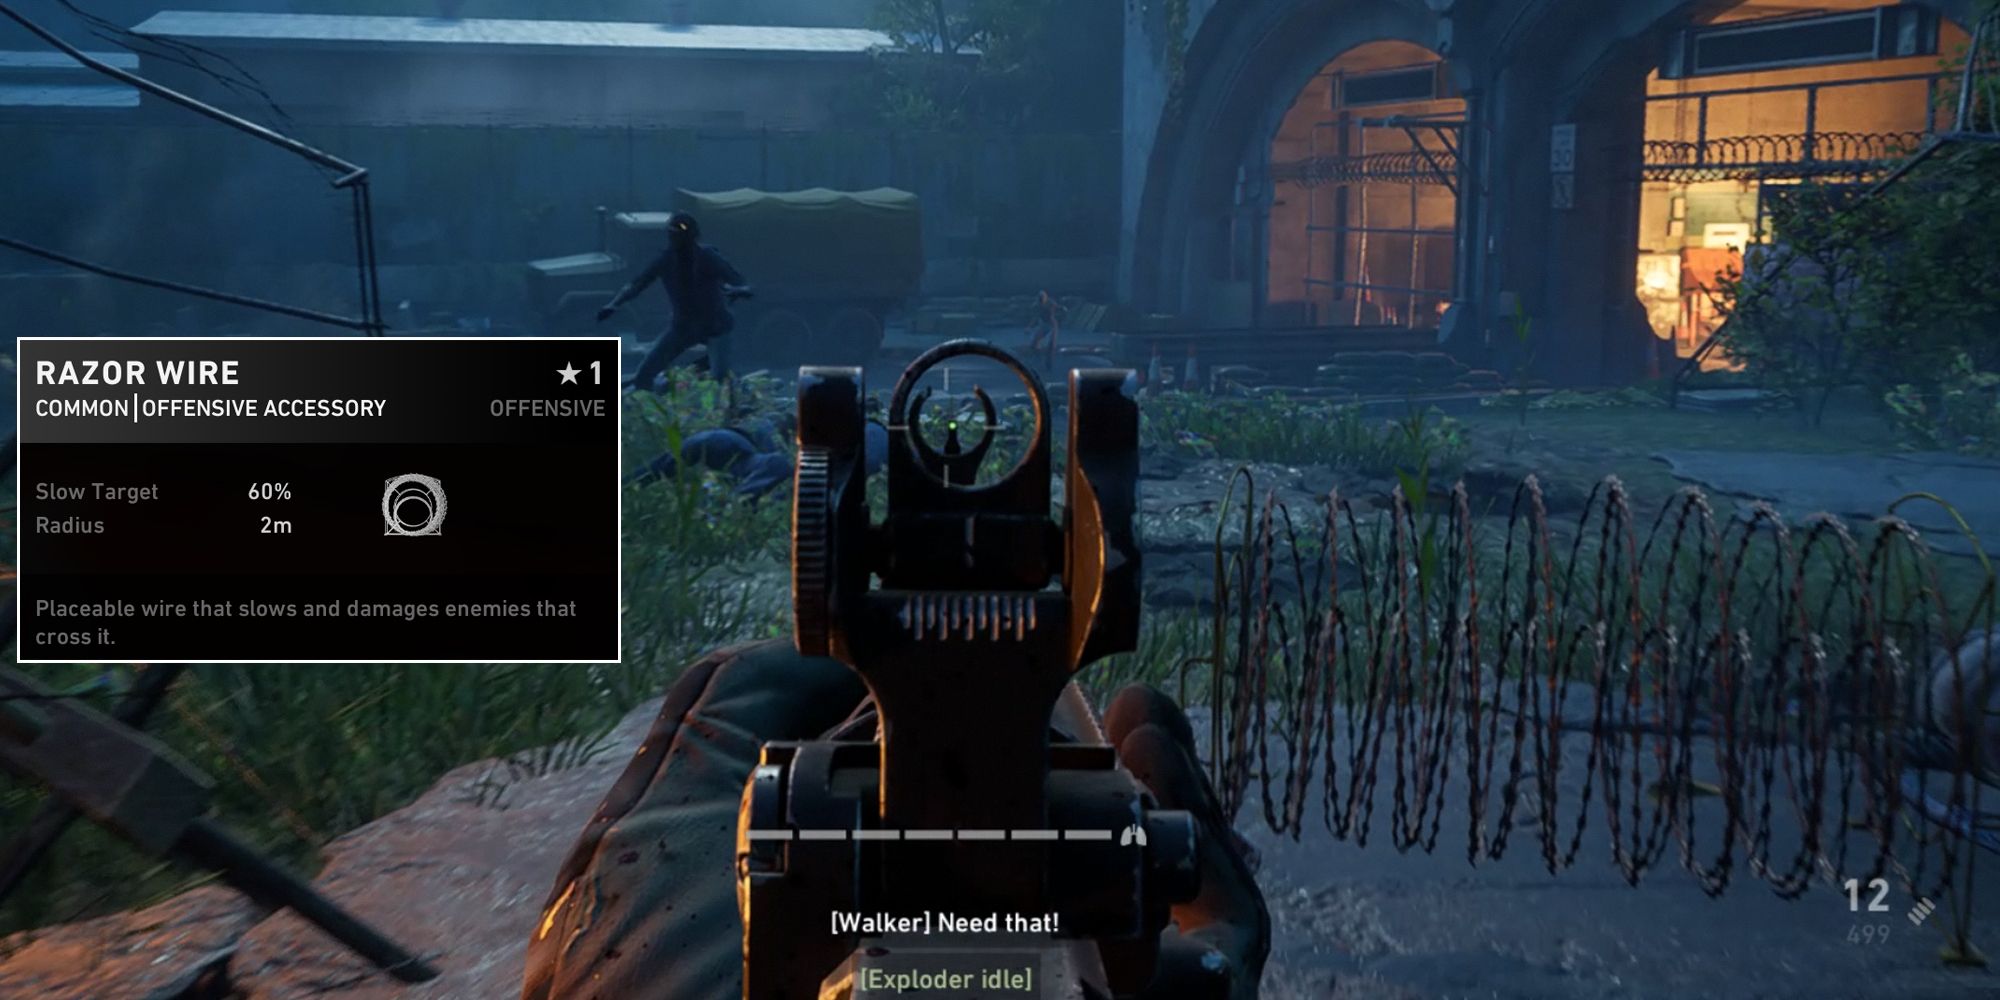 Back 4 Blood. Gun sight aimed at a zombie with razor wire on the floor. Razor wire details on screen.